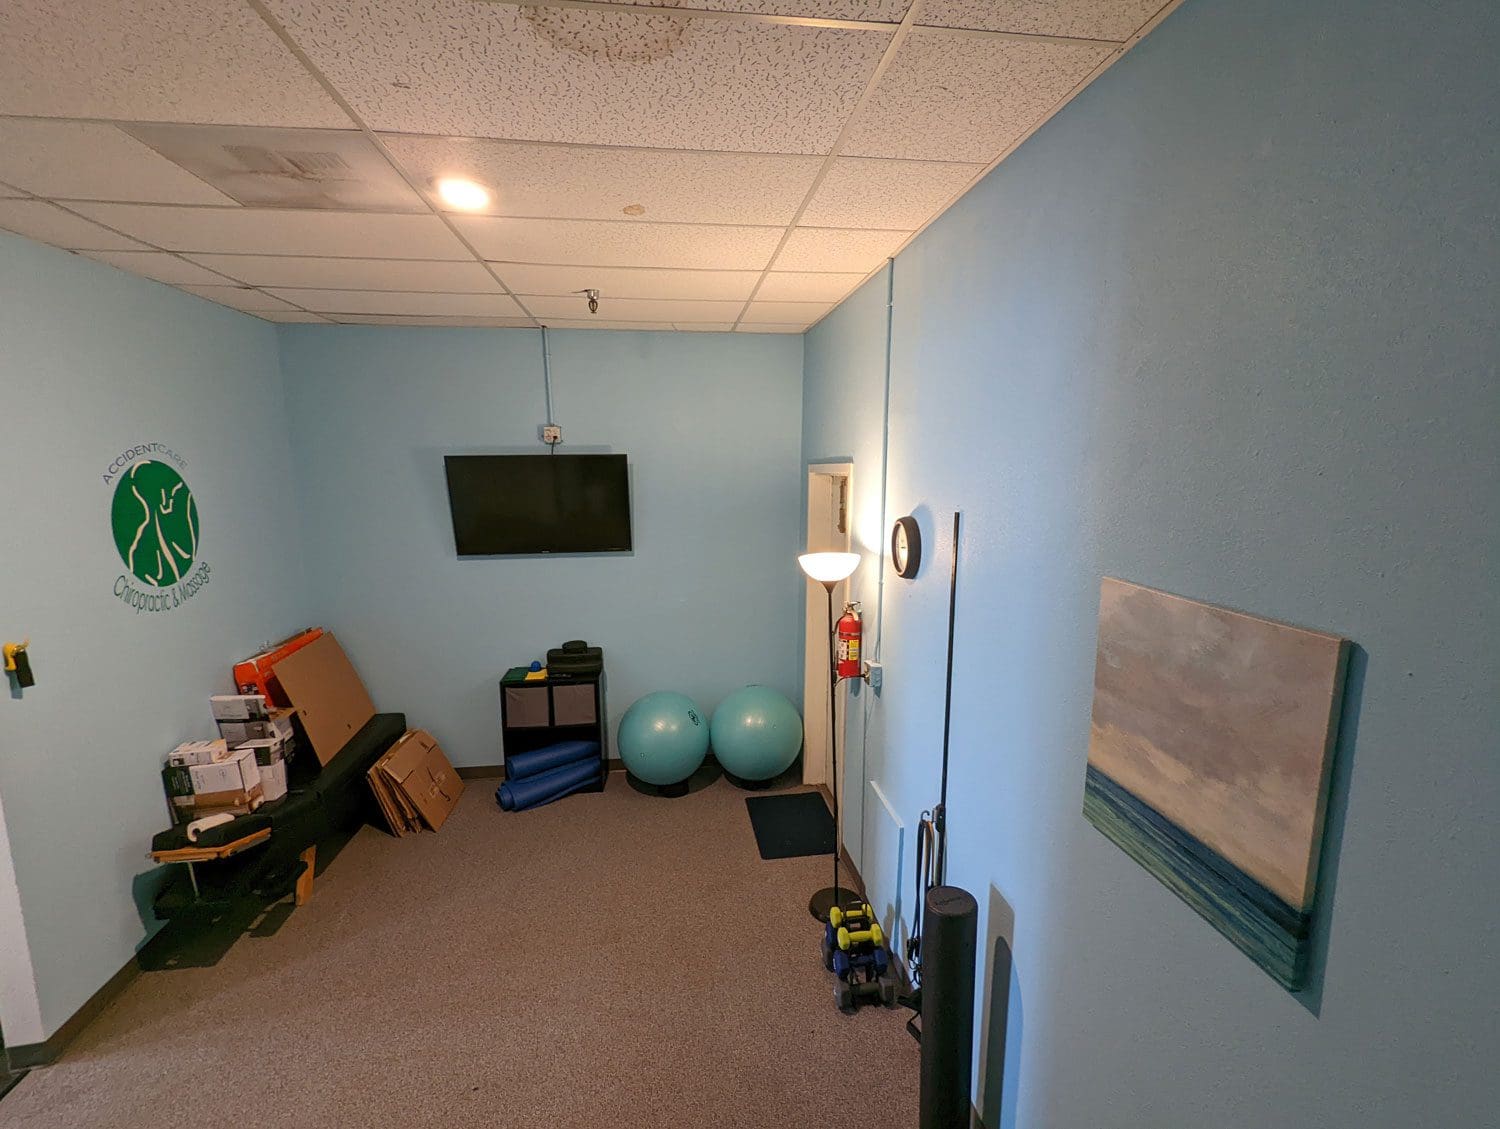 Physical therapy treatment room with light blue walls and physical therapy equipment.